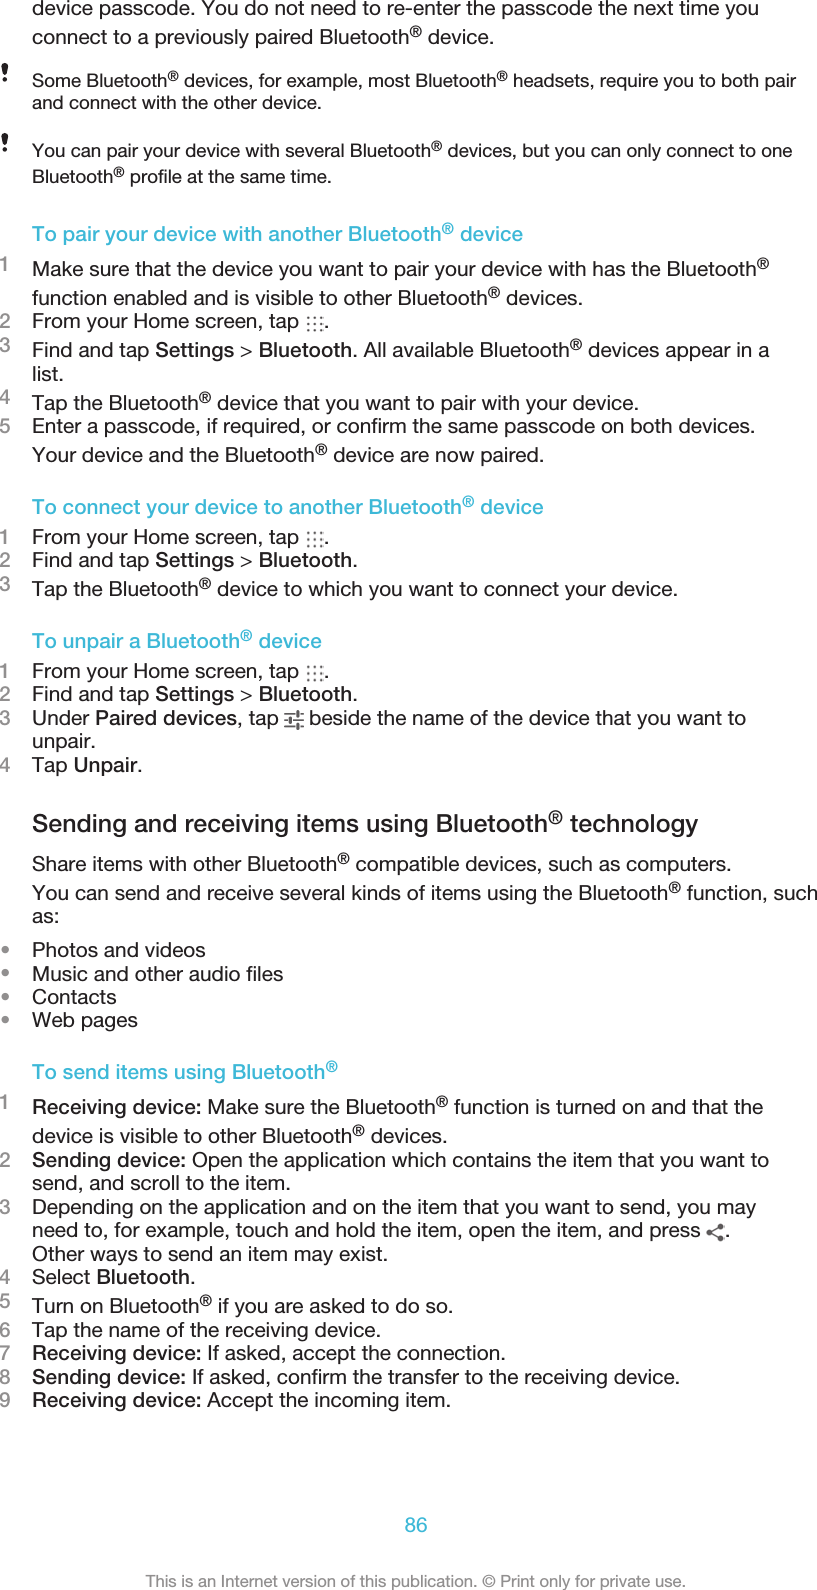 device passcode. You do not need to re-enter the passcode the next time youconnect to a previously paired Bluetooth® device.Some Bluetooth® devices, for example, most Bluetooth® headsets, require you to both pairand connect with the other device.You can pair your device with several Bluetooth® devices, but you can only connect to oneBluetooth® profile at the same time.To pair your device with another Bluetooth® device1Make sure that the device you want to pair your device with has the Bluetooth®function enabled and is visible to other Bluetooth® devices.2From your Home screen, tap  .3Find and tap Settings &gt; Bluetooth. All available Bluetooth® devices appear in alist.4Tap the Bluetooth® device that you want to pair with your device.5Enter a passcode, if required, or confirm the same passcode on both devices.Your device and the Bluetooth® device are now paired.To connect your device to another Bluetooth® device1From your Home screen, tap  .2Find and tap Settings &gt; Bluetooth.3Tap the Bluetooth® device to which you want to connect your device.To unpair a Bluetooth® device1From your Home screen, tap  .2Find and tap Settings &gt; Bluetooth.3Under Paired devices, tap   beside the name of the device that you want tounpair.4Tap Unpair.Sending and receiving items using Bluetooth® technologyShare items with other Bluetooth® compatible devices, such as computers.You can send and receive several kinds of items using the Bluetooth® function, suchas:•Photos and videos•Music and other audio files•Contacts•Web pagesTo send items using Bluetooth®1Receiving device: Make sure the Bluetooth® function is turned on and that thedevice is visible to other Bluetooth® devices.2Sending device: Open the application which contains the item that you want tosend, and scroll to the item.3Depending on the application and on the item that you want to send, you mayneed to, for example, touch and hold the item, open the item, and press  .Other ways to send an item may exist.4Select Bluetooth.5Turn on Bluetooth® if you are asked to do so.6Tap the name of the receiving device.7Receiving device: If asked, accept the connection.8Sending device: If asked, confirm the transfer to the receiving device.9Receiving device: Accept the incoming item.86This is an Internet version of this publication. © Print only for private use.